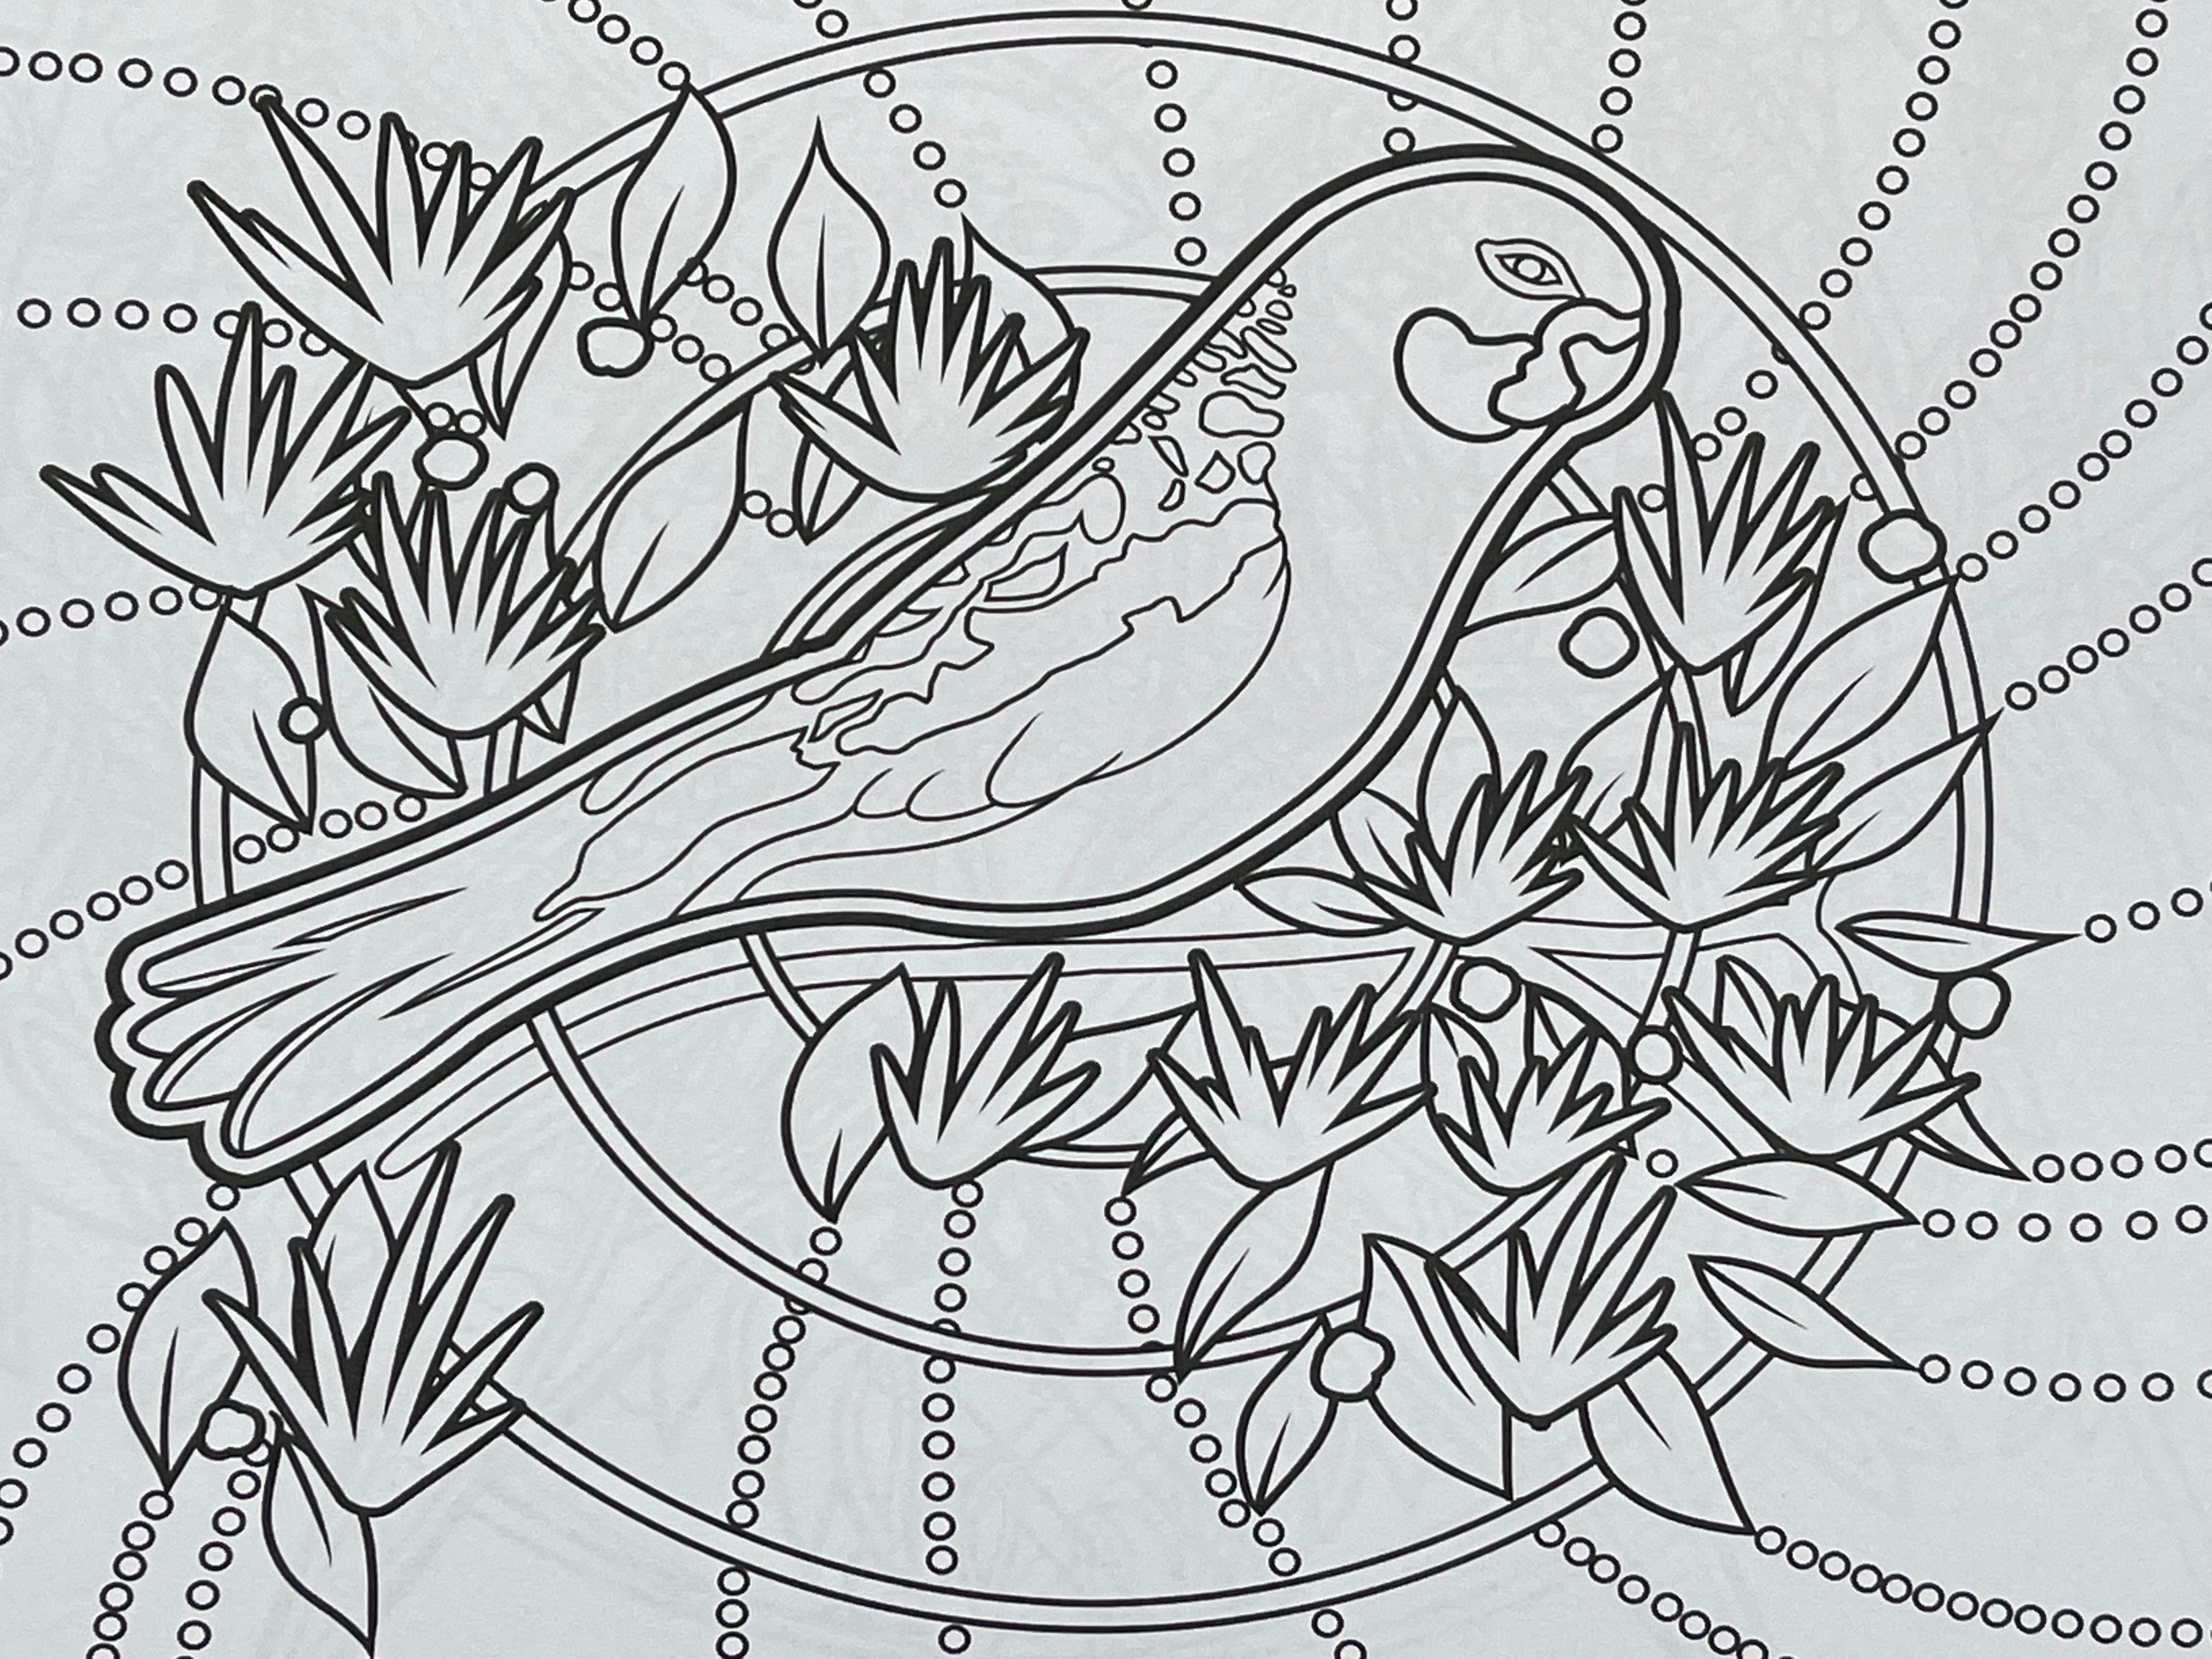 Animal Totems Colouring Book - Mirree Bayliss